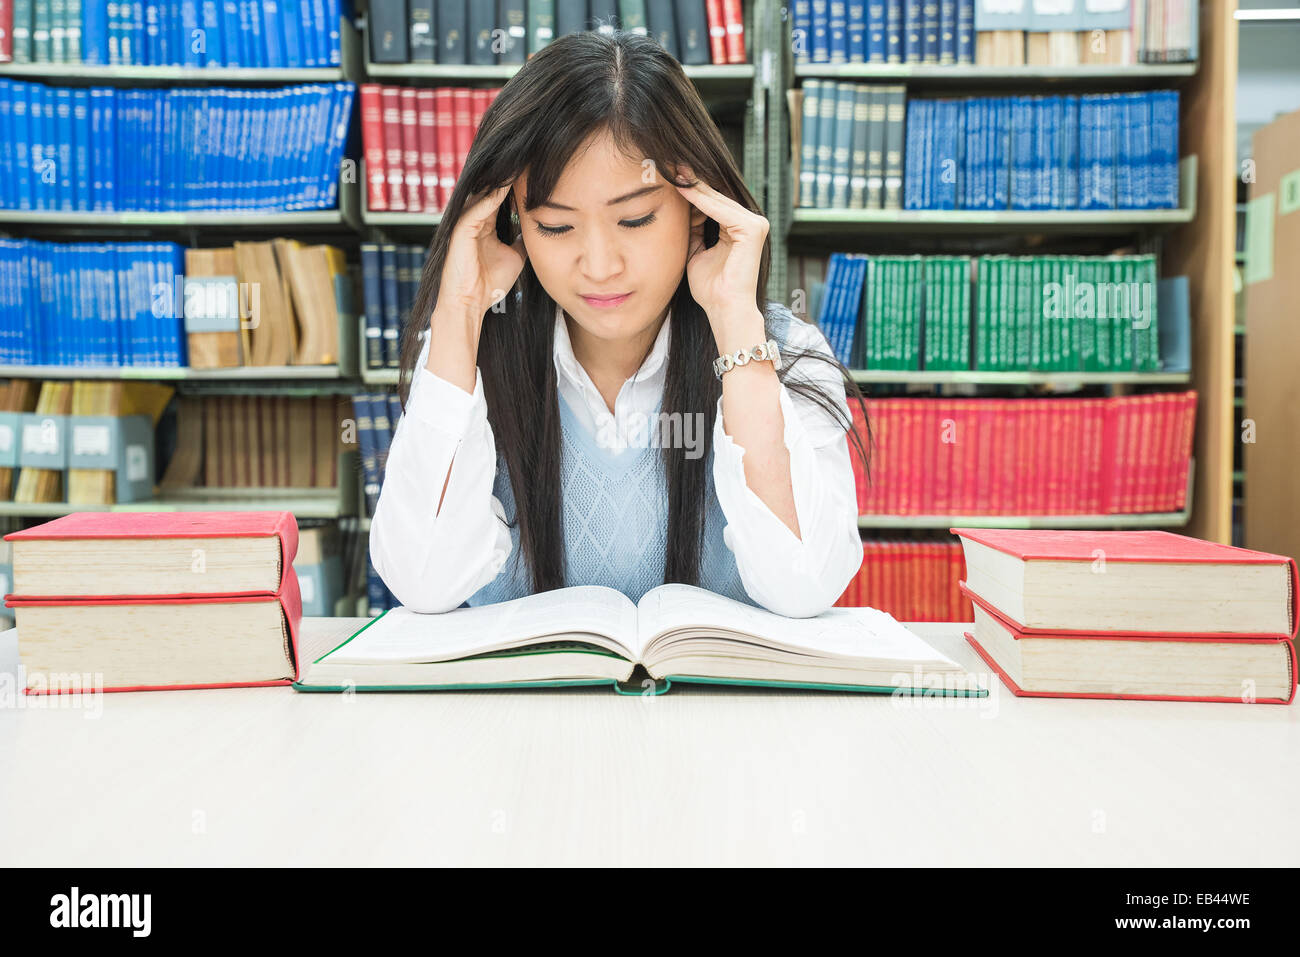 Young asian student under mental pressure Stock Photo